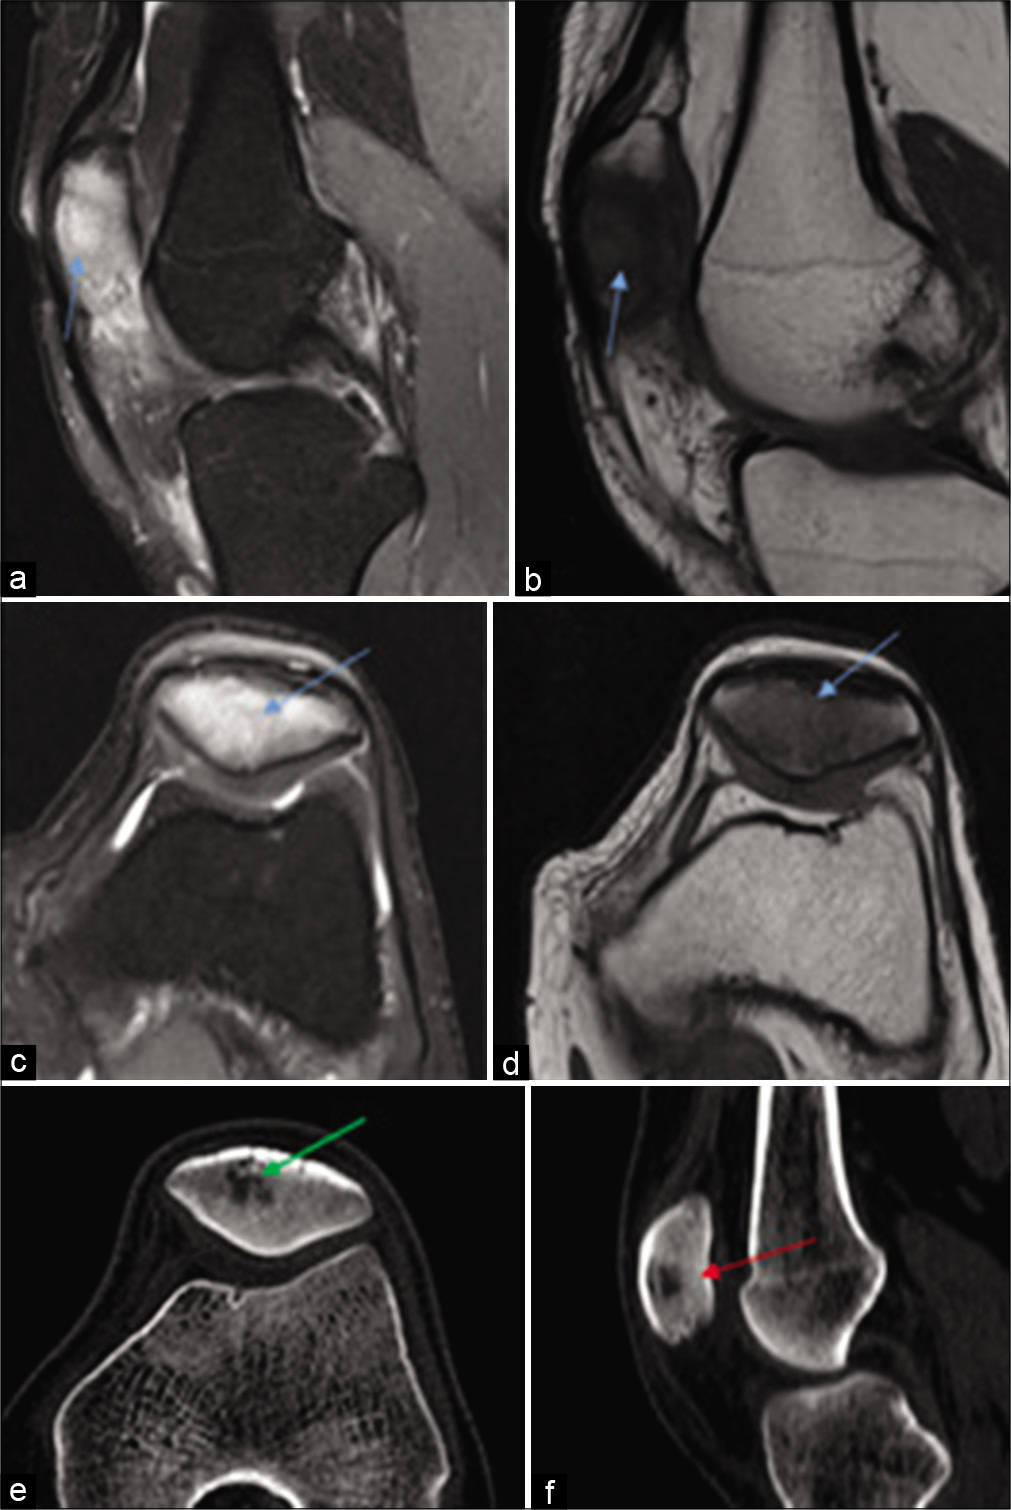 Case 1 – Sagittal PDFS and T1 (a, b), axial PDFS (c) and T1 (d) and CT scan (bone window) axial (e) and sagittal sections (f) reveal progression, in the form of hyperintense marrow signals involving the entire patella (blue arrow a and b) and CT scan reveals the appearance of a focal lytic lesion involving the patella with fresh appearance of adjacent sclerosis (green and red arrow).